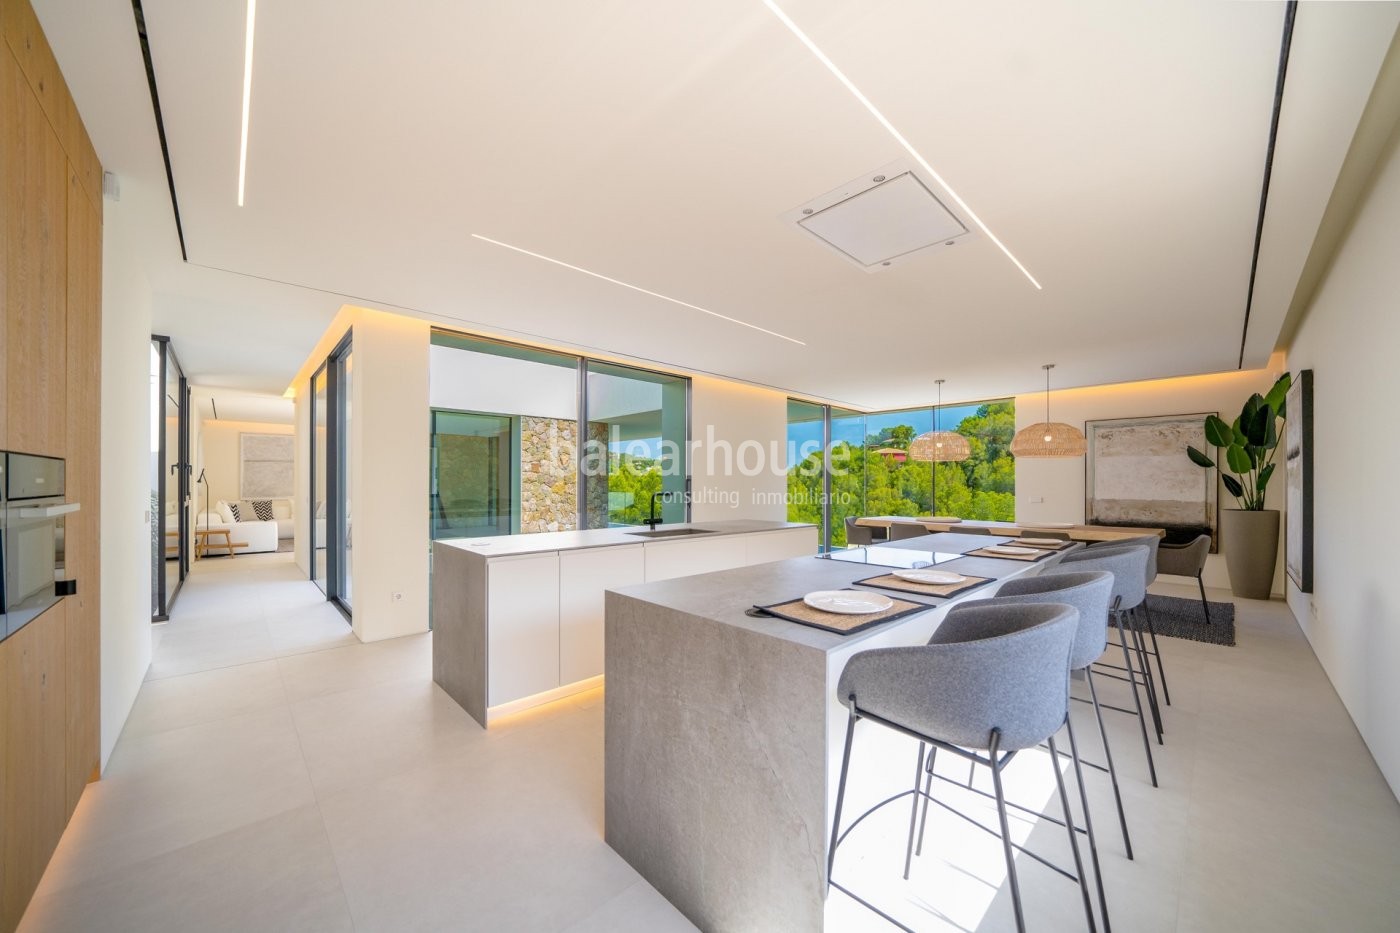 New and contemporary villa of new construction with the maximum well-being in Costa d’en Blanes